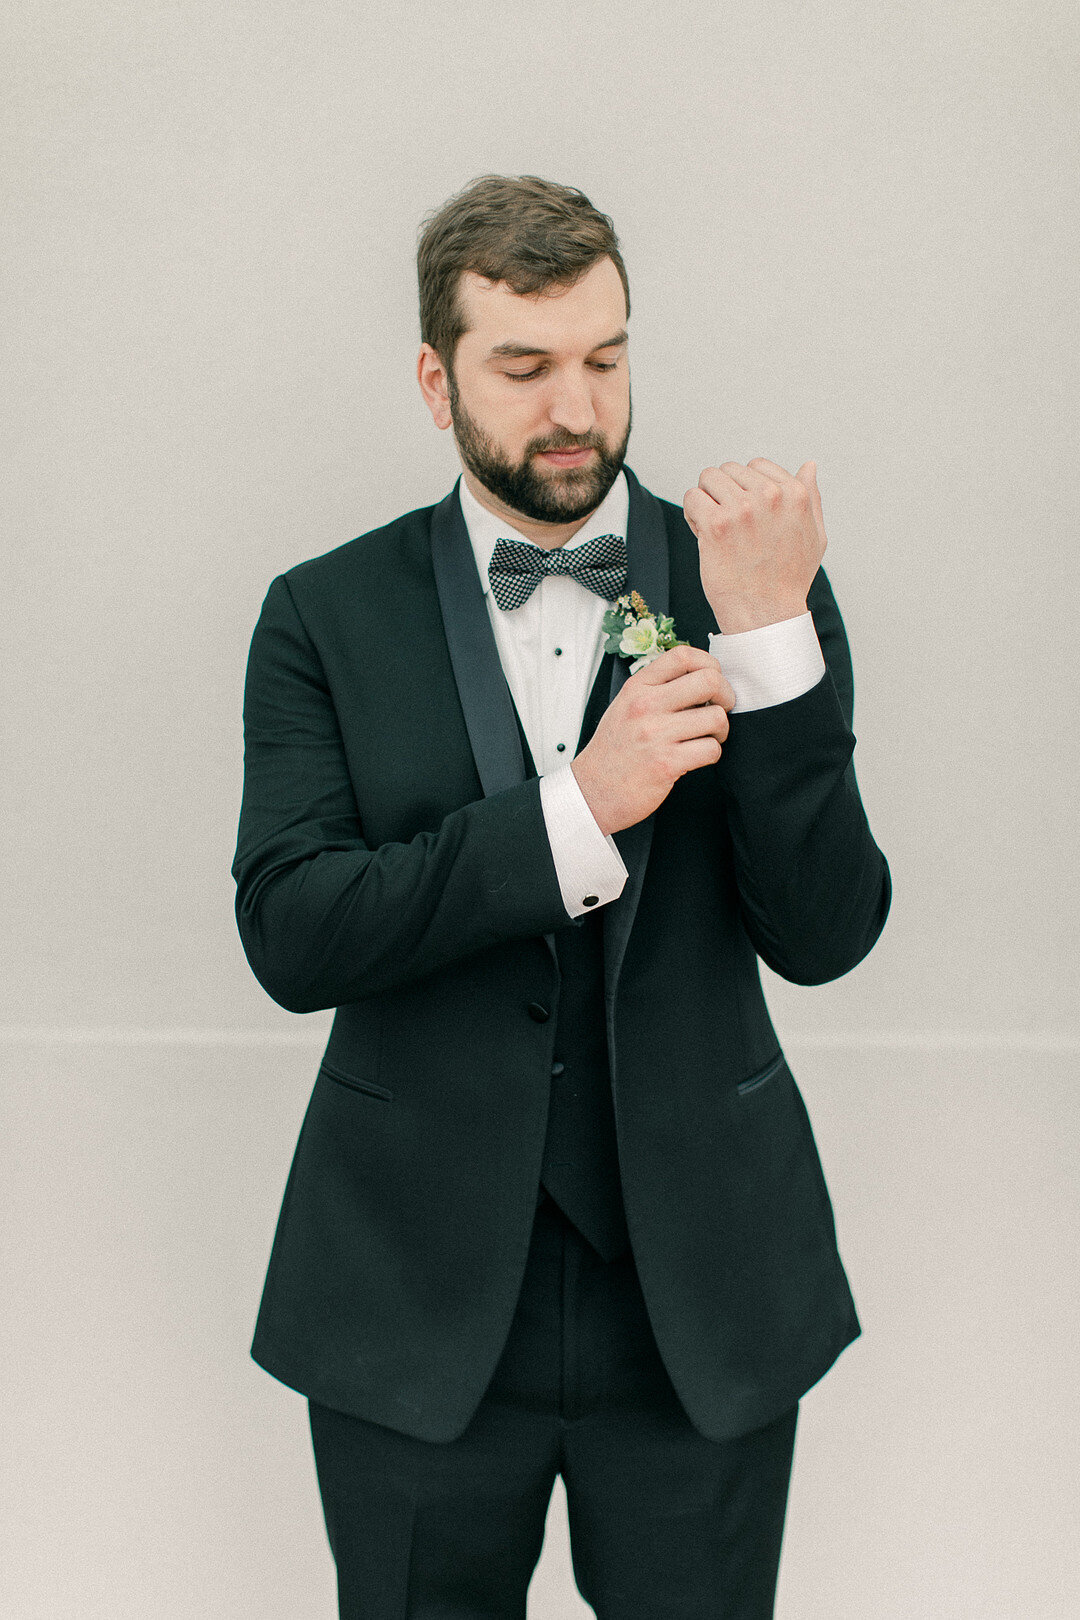 Spring has sprung in the Hudson Valley and this intimate wedding makes us want to lay in a field of_Krystal Balzer Photography _Publish -58_low